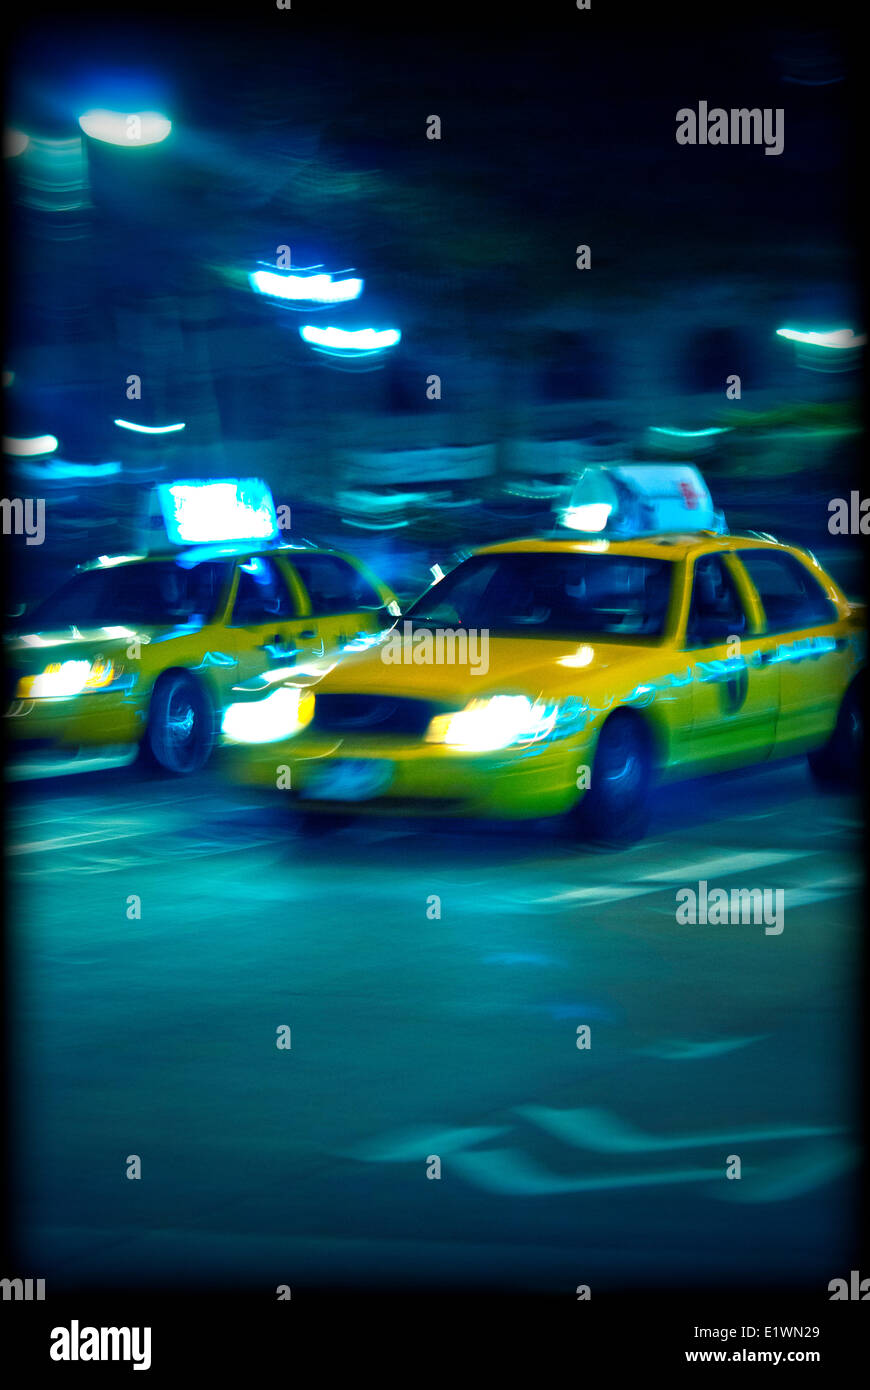 New York yellow taxi on a street at night Stock Photo